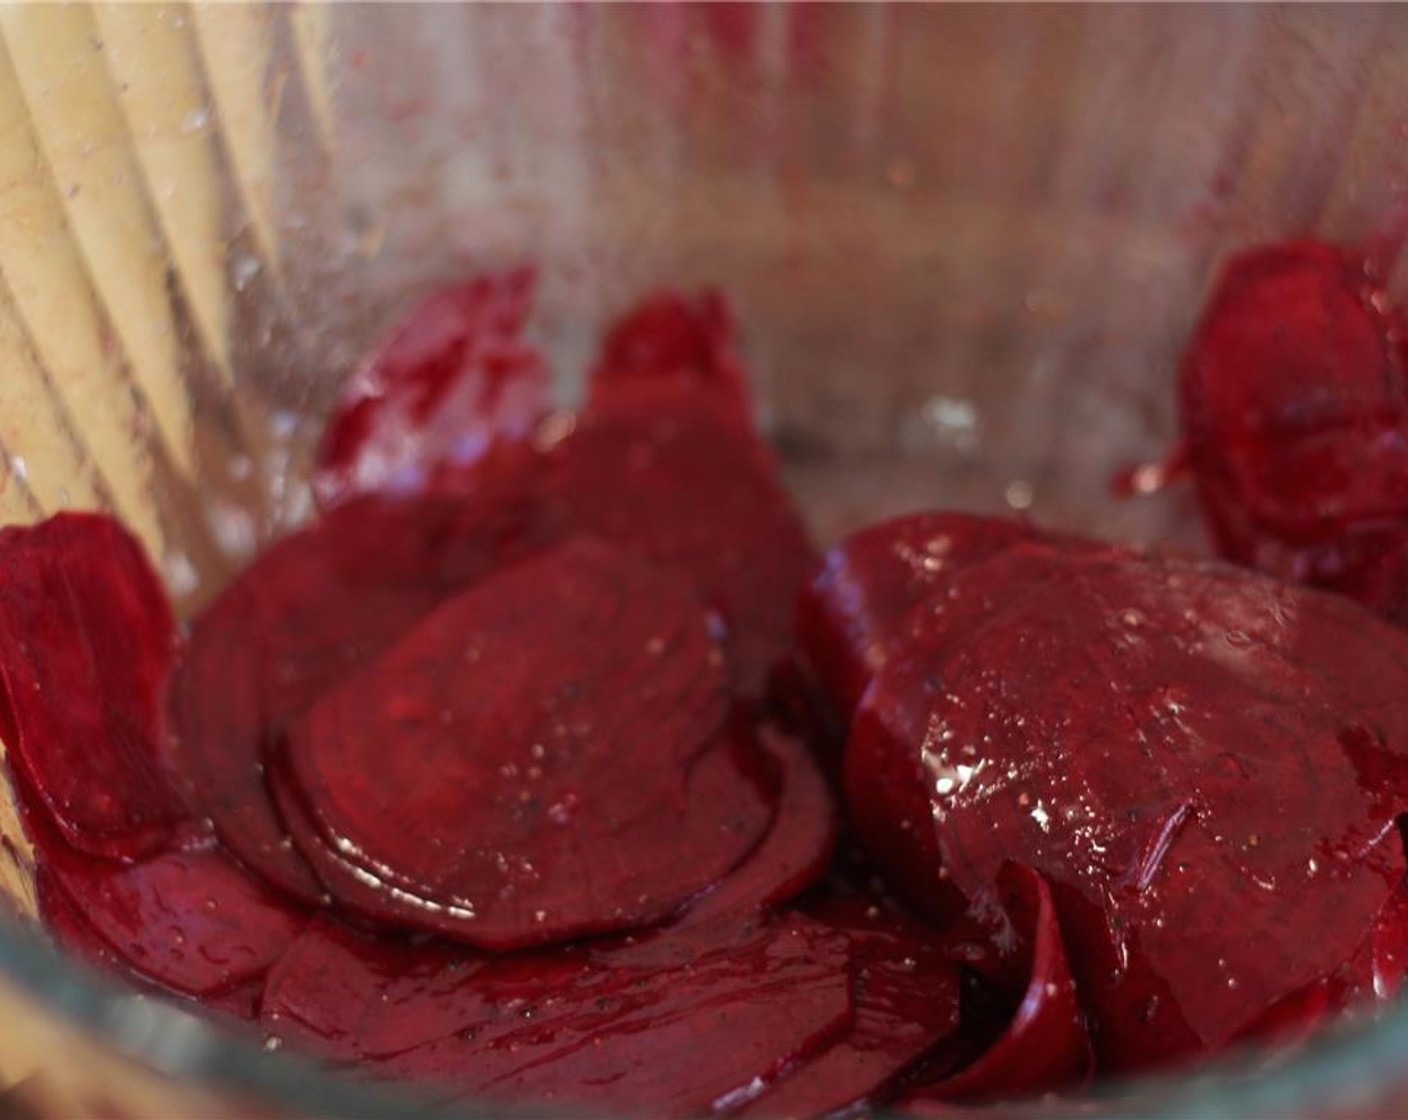 step 8 Toss the beets slices with Olive Oil (1 tsp) and a pinch of salt. Spread evenly on the baking rack and place into the oven to bake for about 20 minutes, or until the chips are cooked through and crispy.